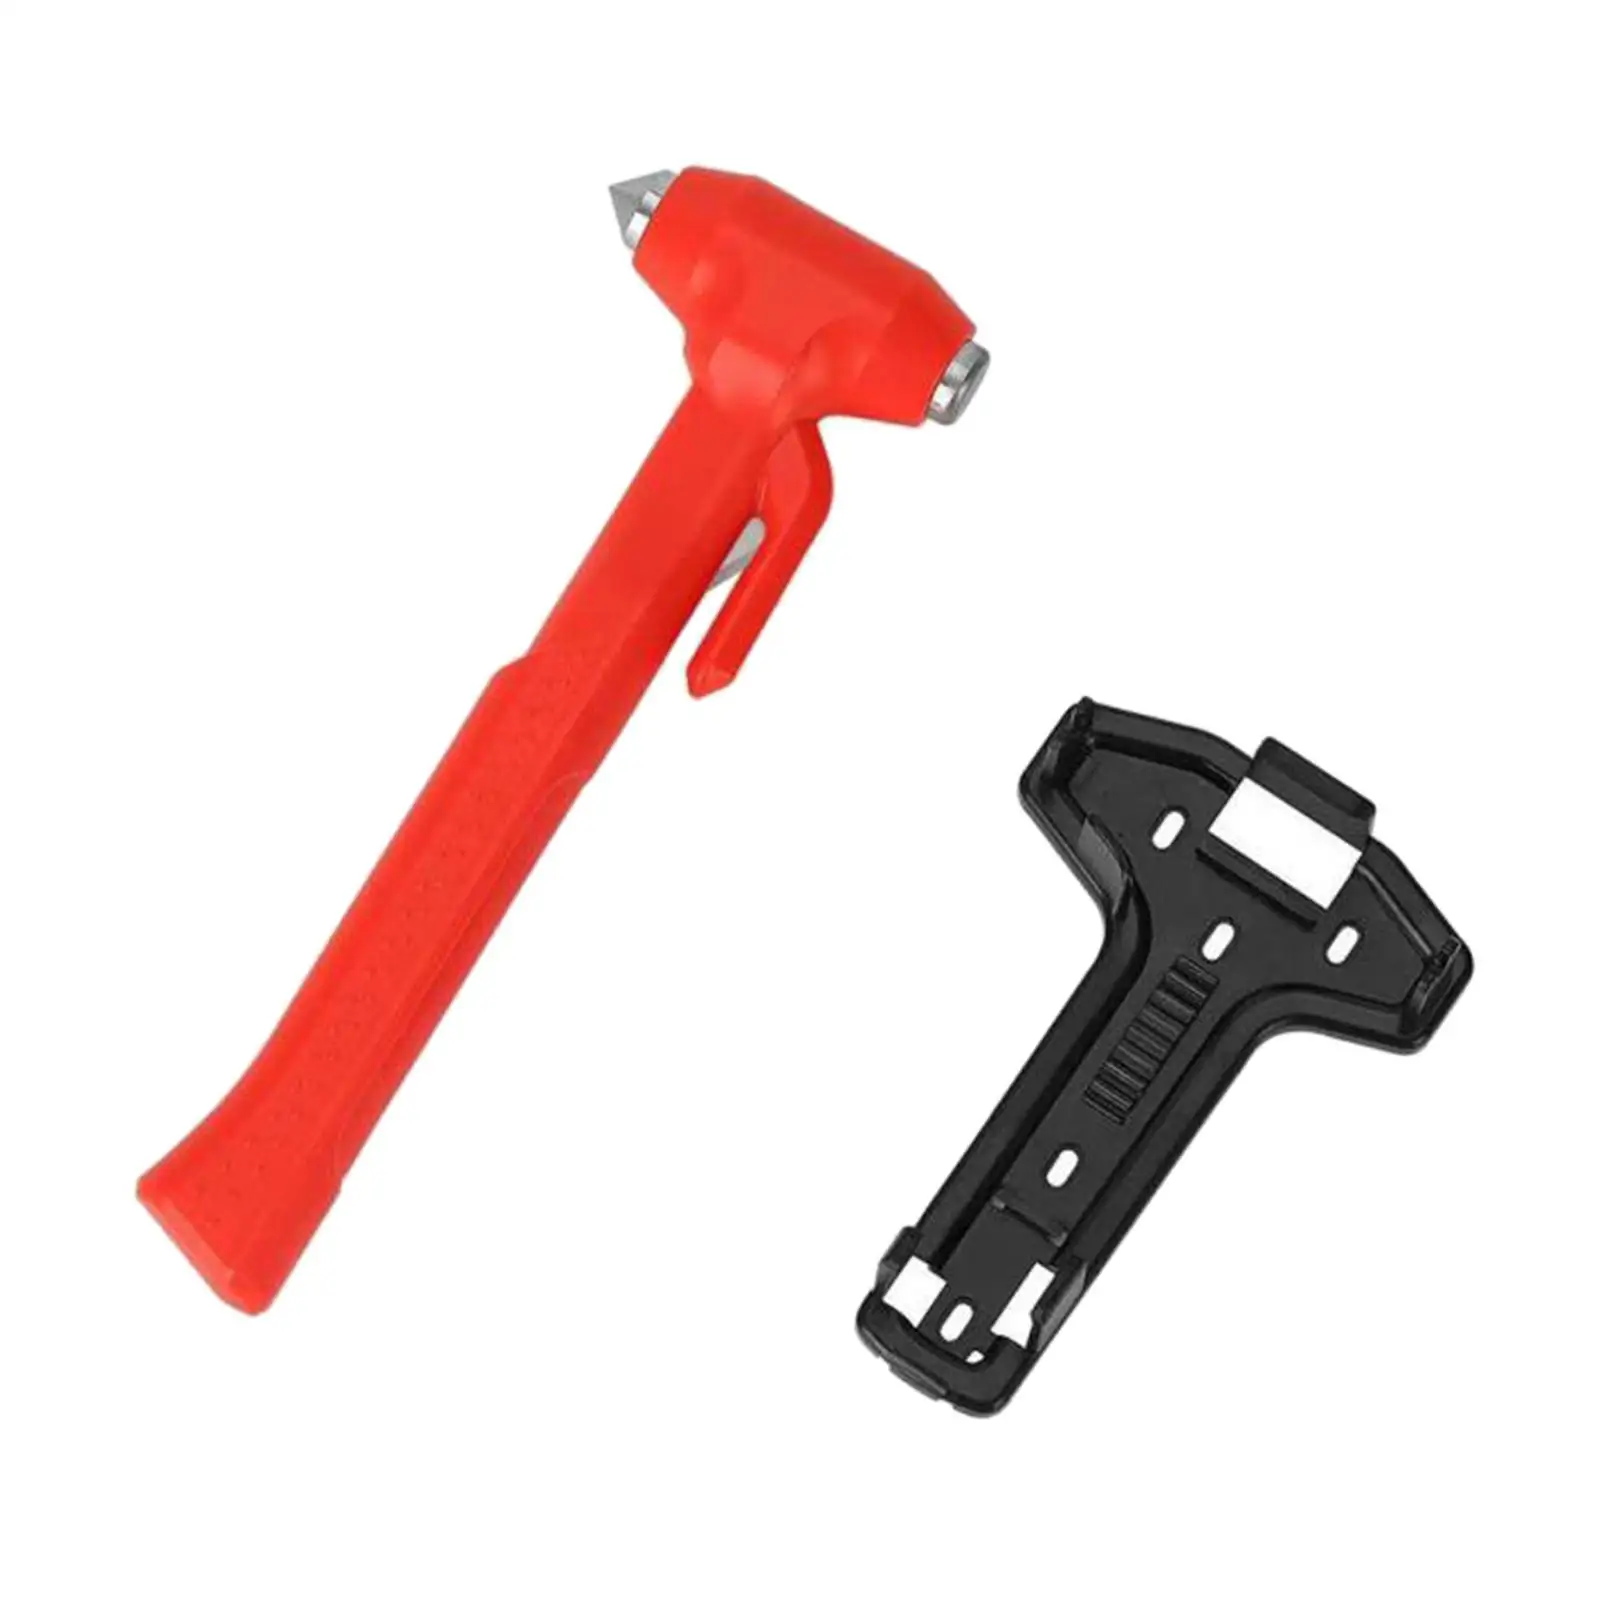 Automotive Safety Hammer Tool Non Slip Handle Window Breaker Emergency Rescue Tool for Card Vehicles Automotive Suvs Red